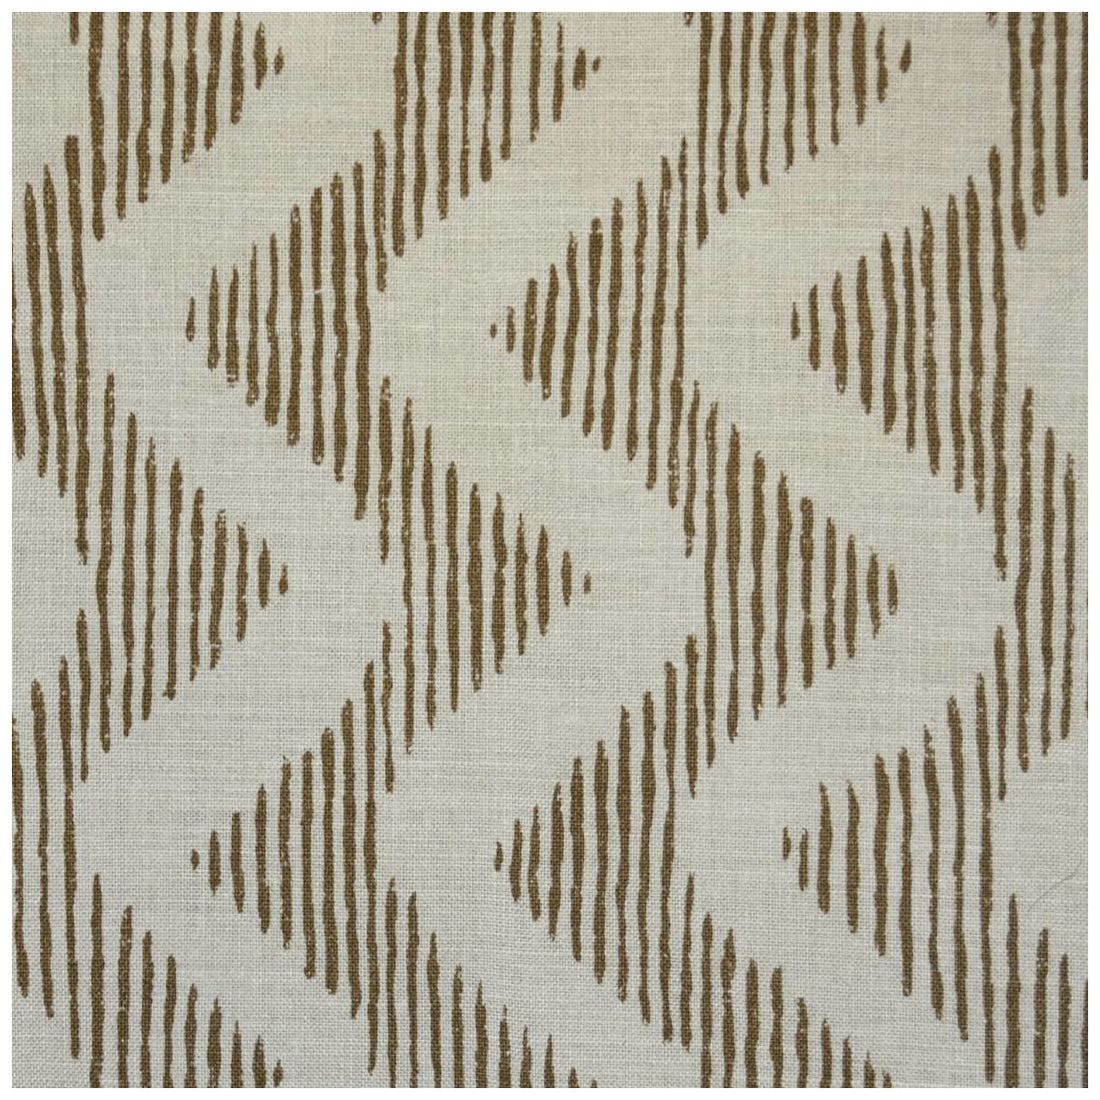 Colebrook fabric in brwn/natural color - pattern BFC-3632.6.0 - by Lee Jofa in the Blithfield collection